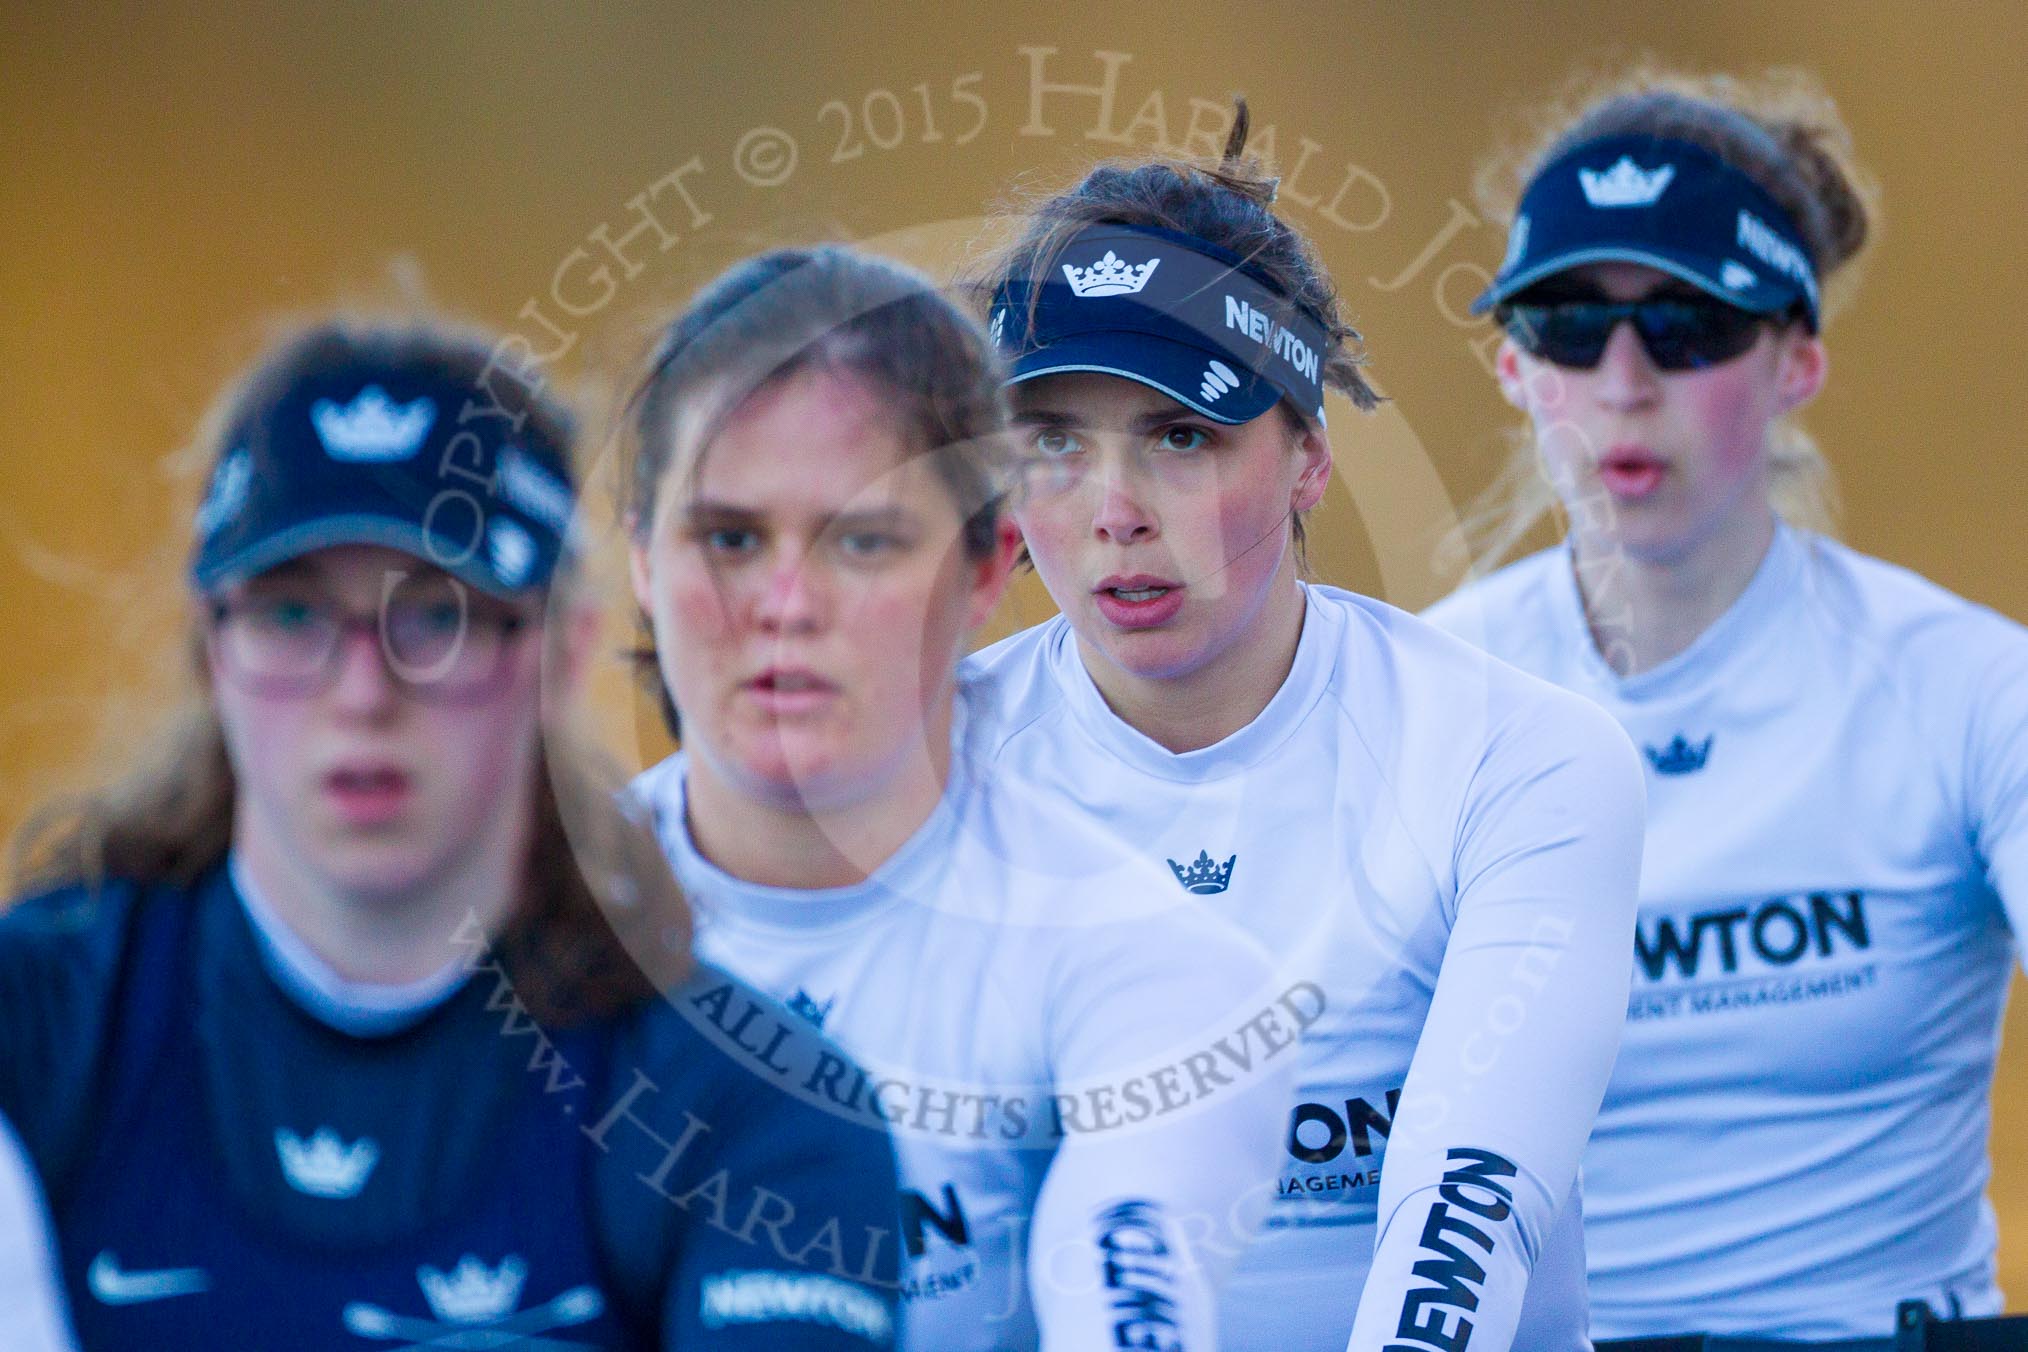 The Boat Race season 2015: OUWBC training Wallingford.

Wallingford,

United Kingdom,
on 04 March 2015 at 17:26, image #345